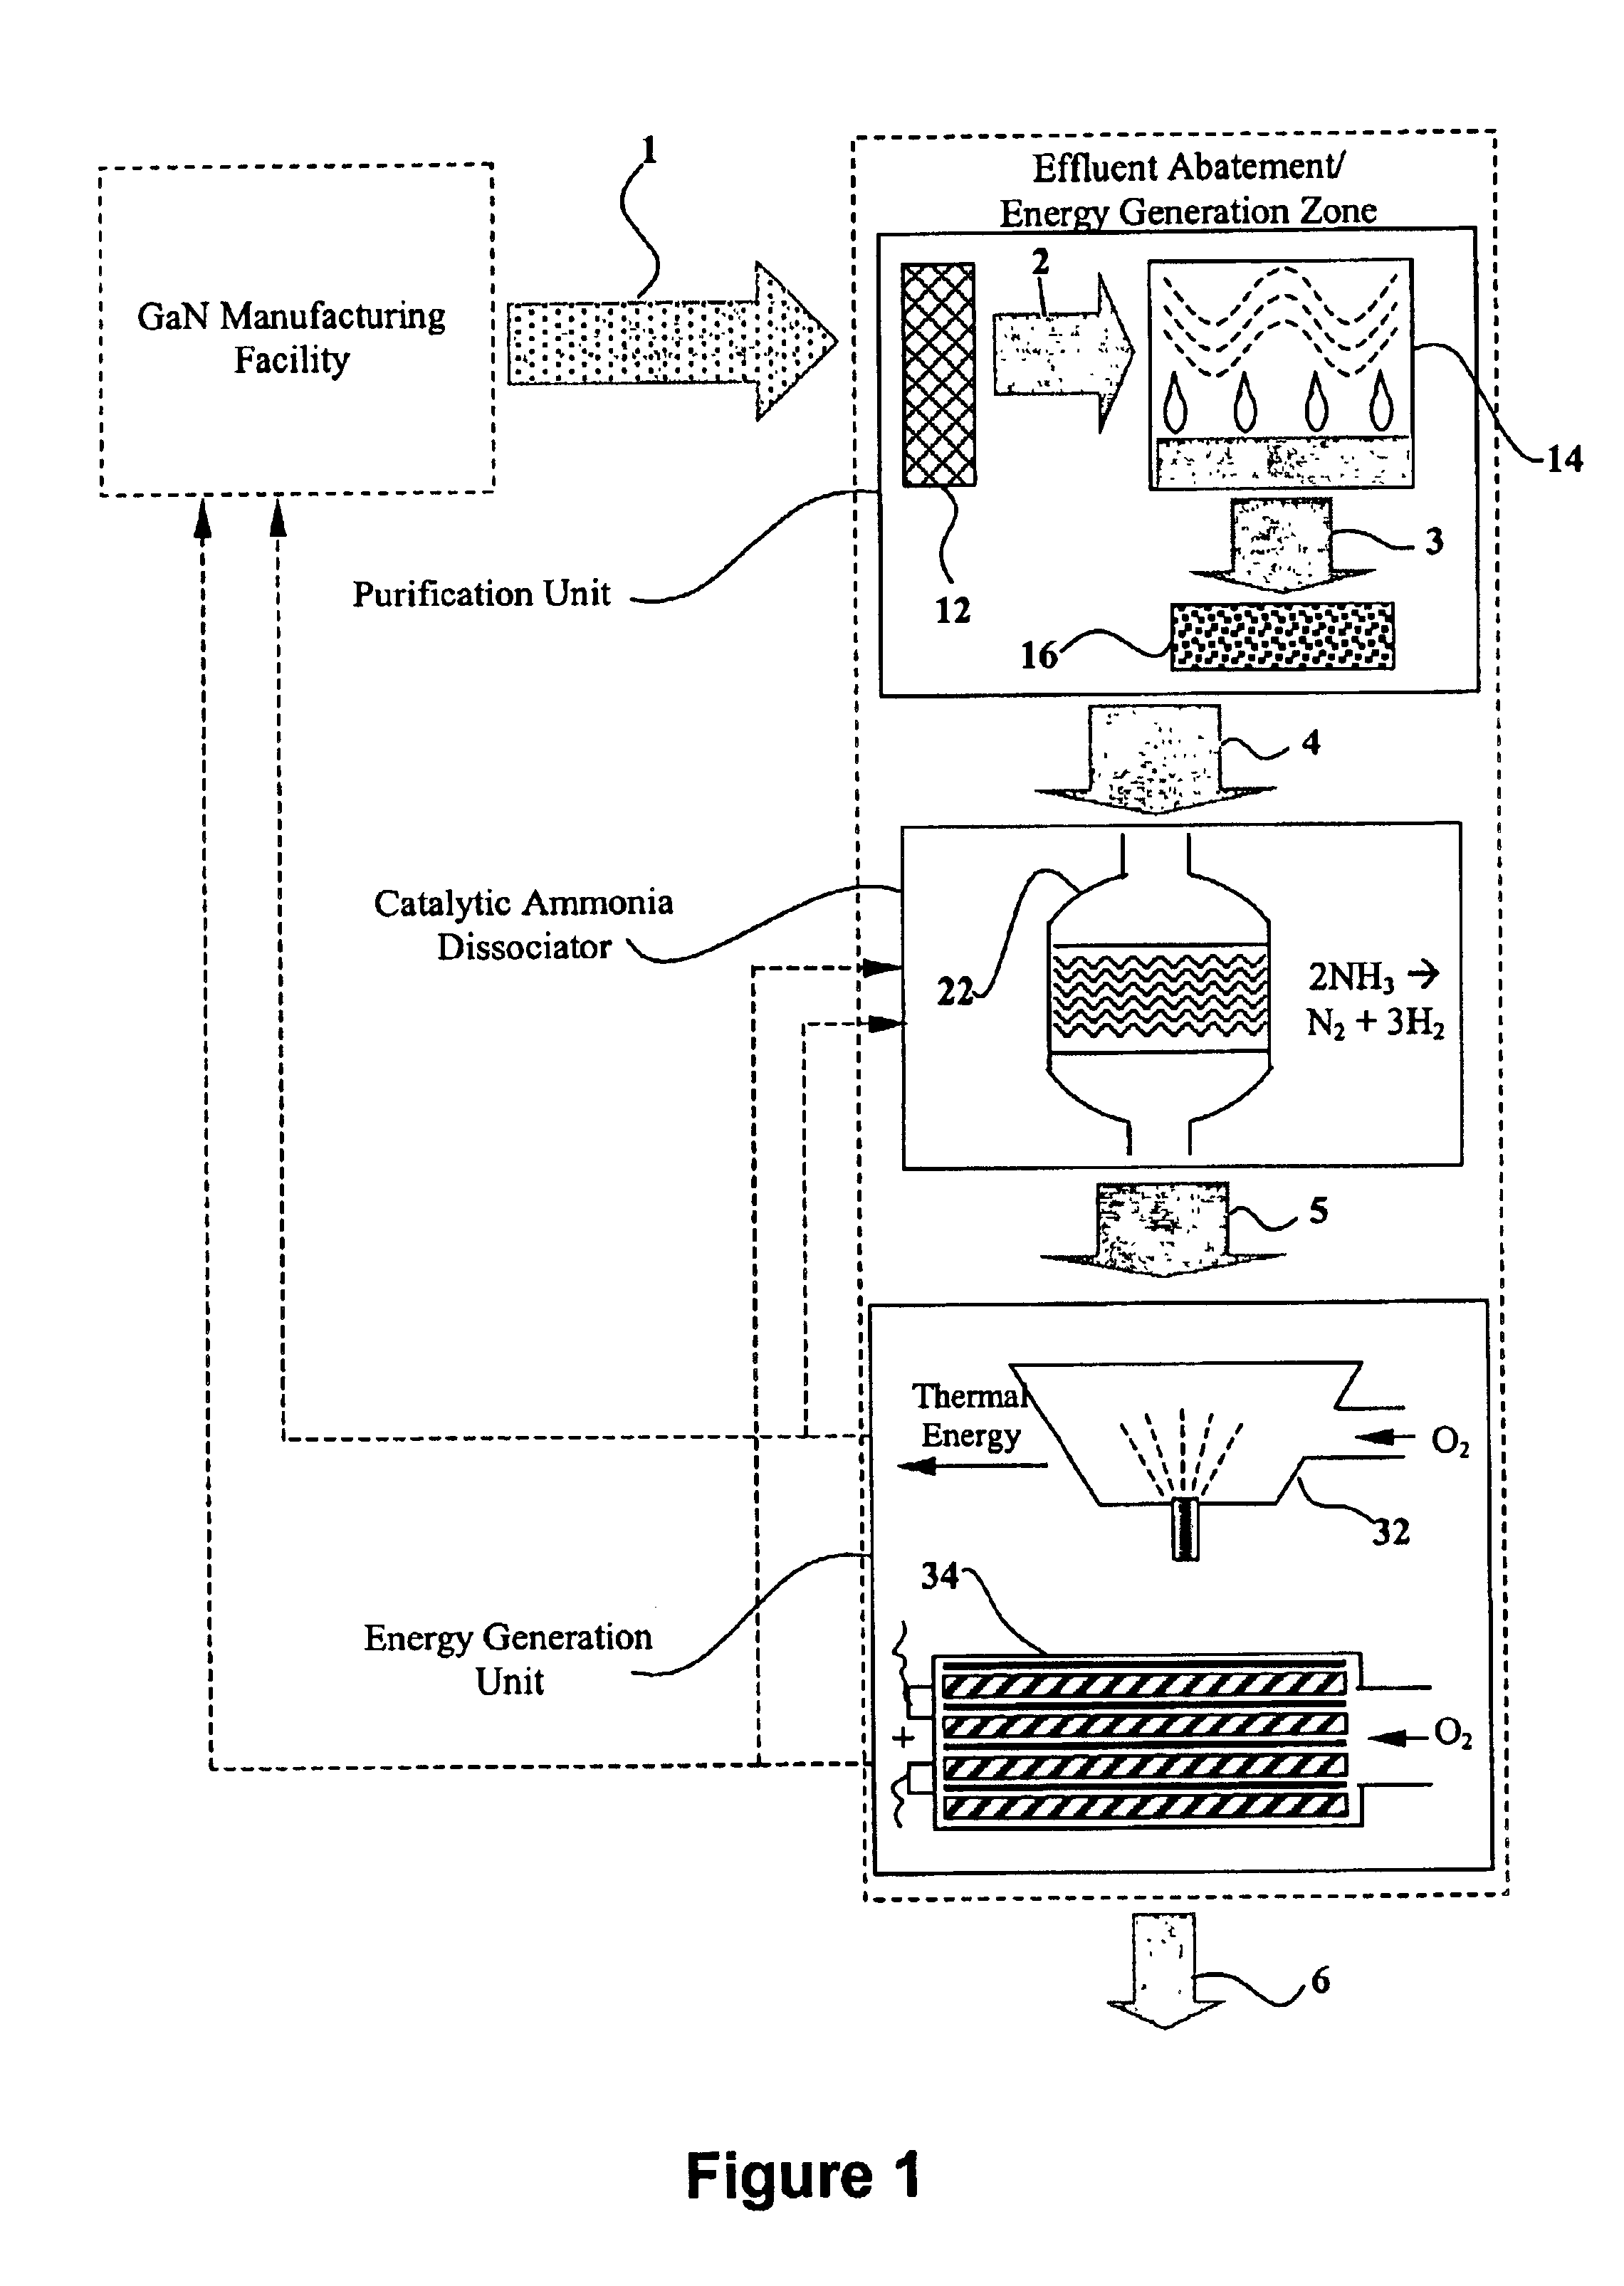 Integrated system and process for effluent abatement and energy generation